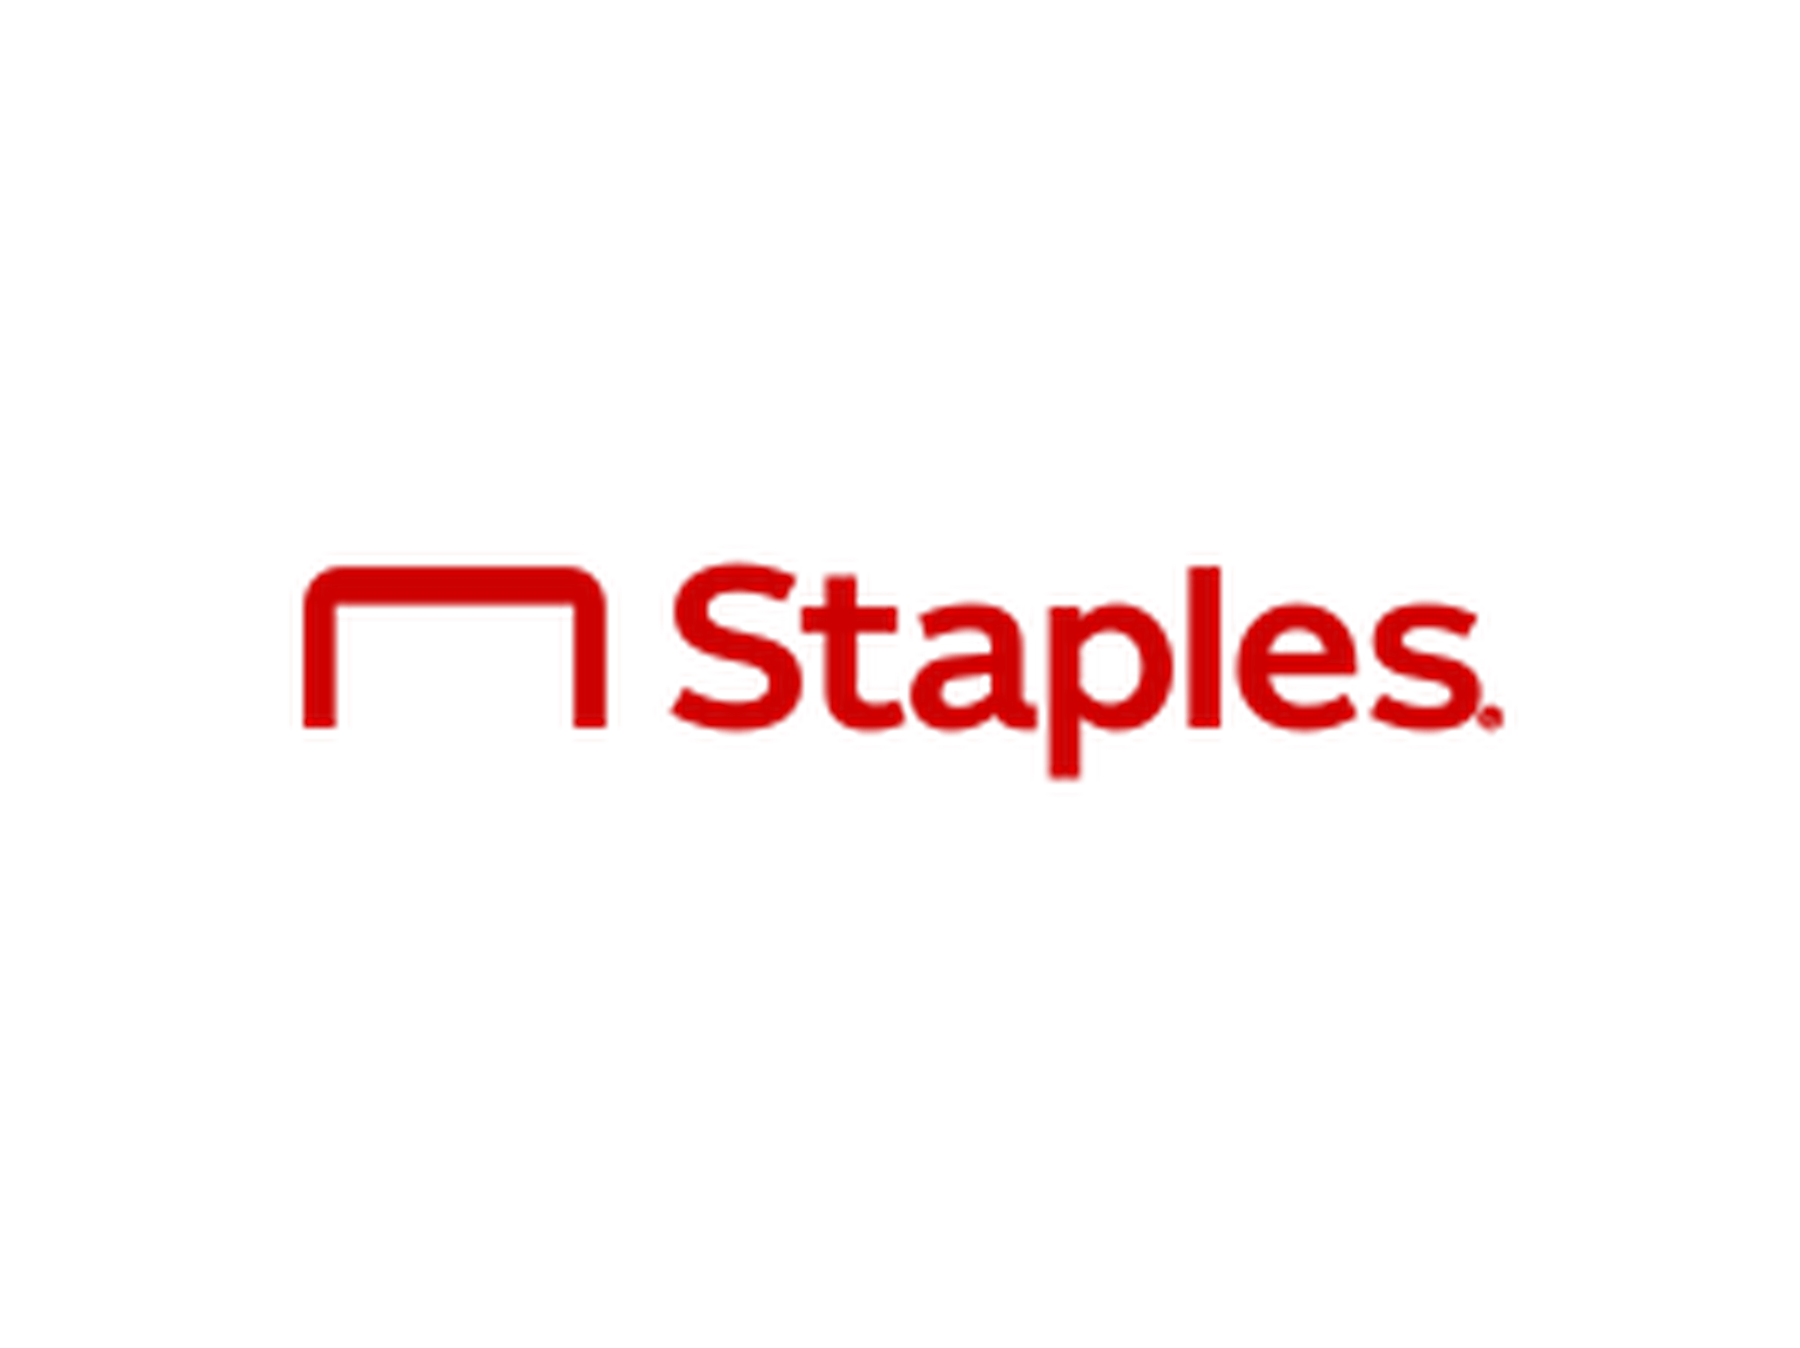 https://coupons.com/images/1800x/images/s/Staples.png